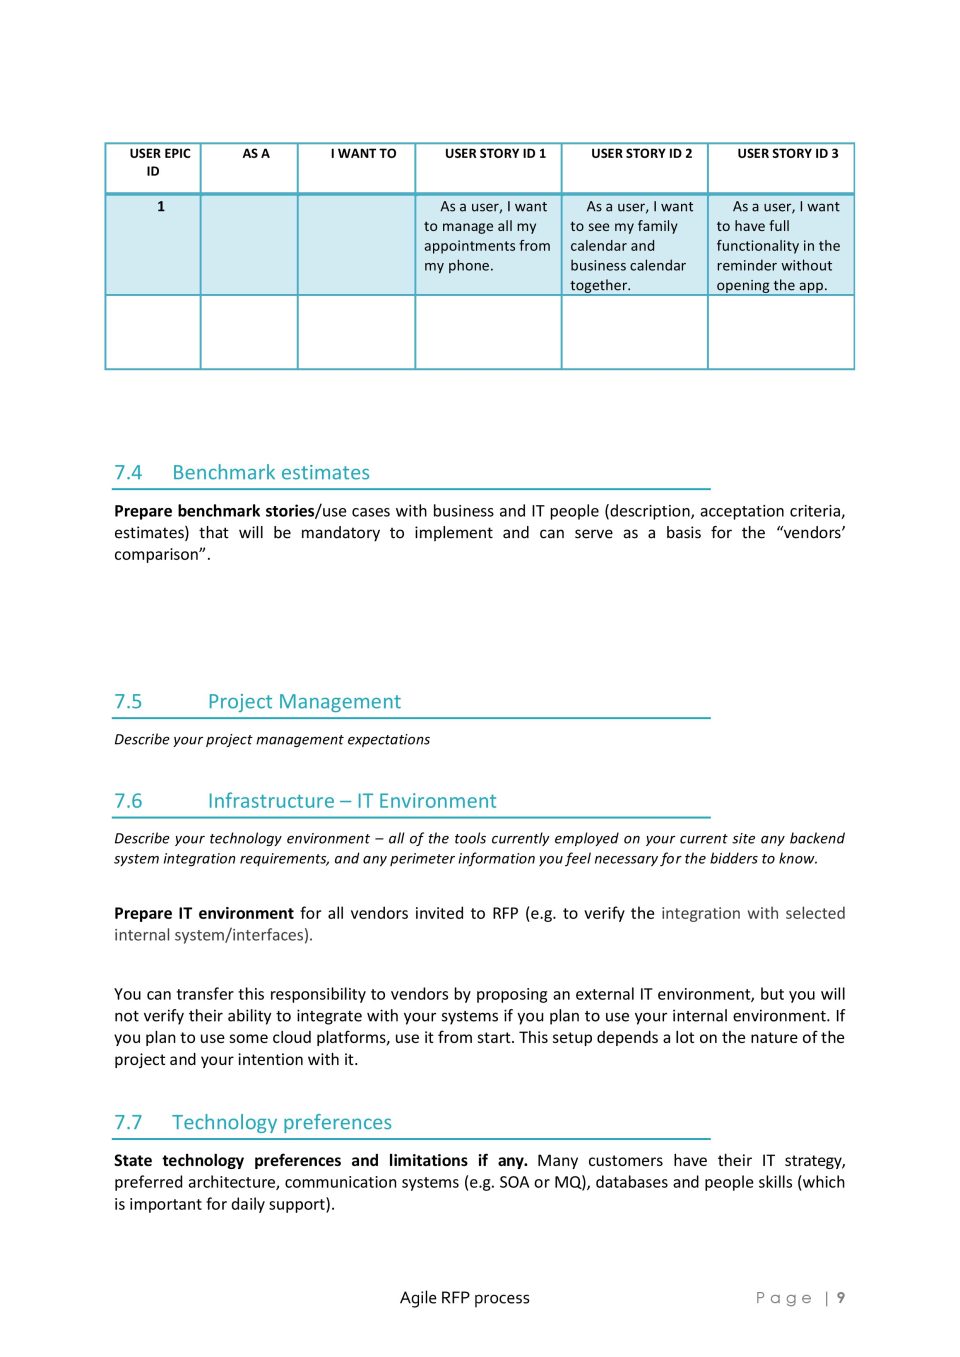 Agile methodology offer applied for the RFP process VF 09 scaled